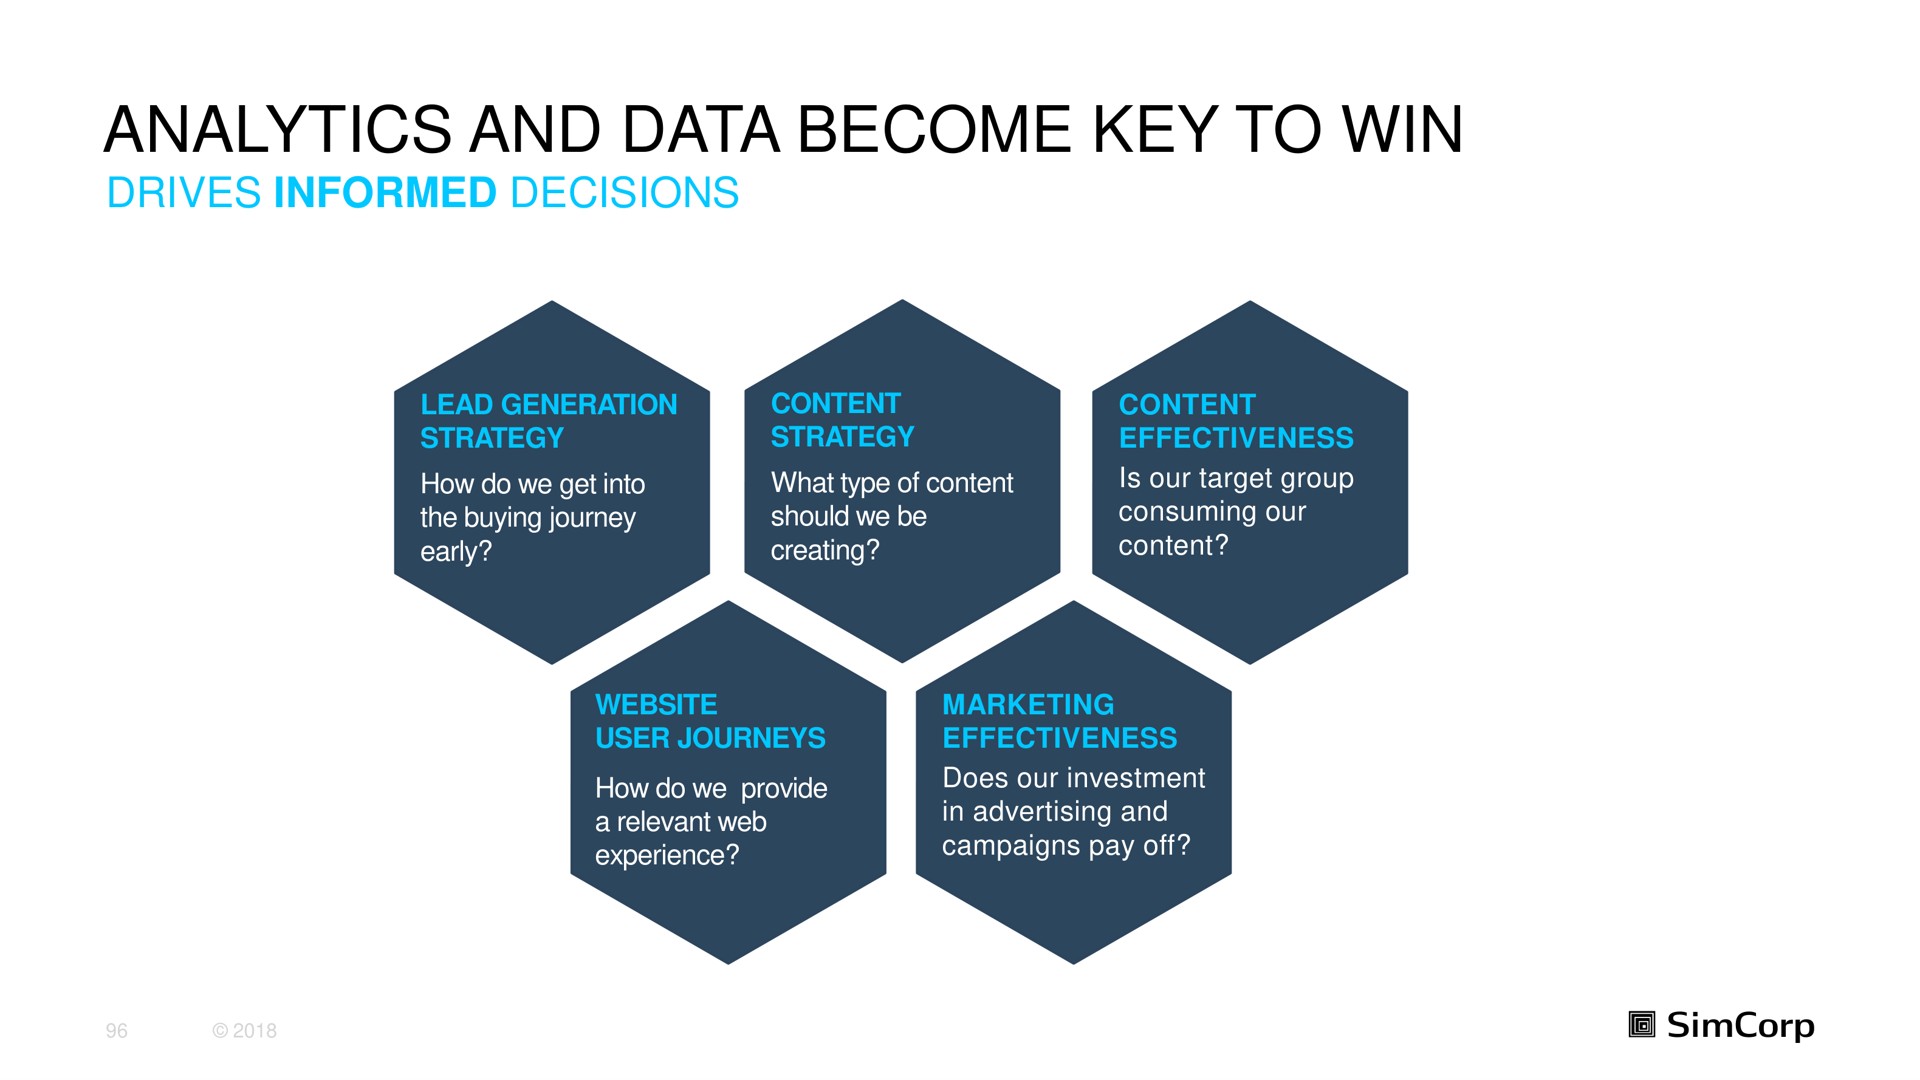 analytics and data become key to win | SimCorp